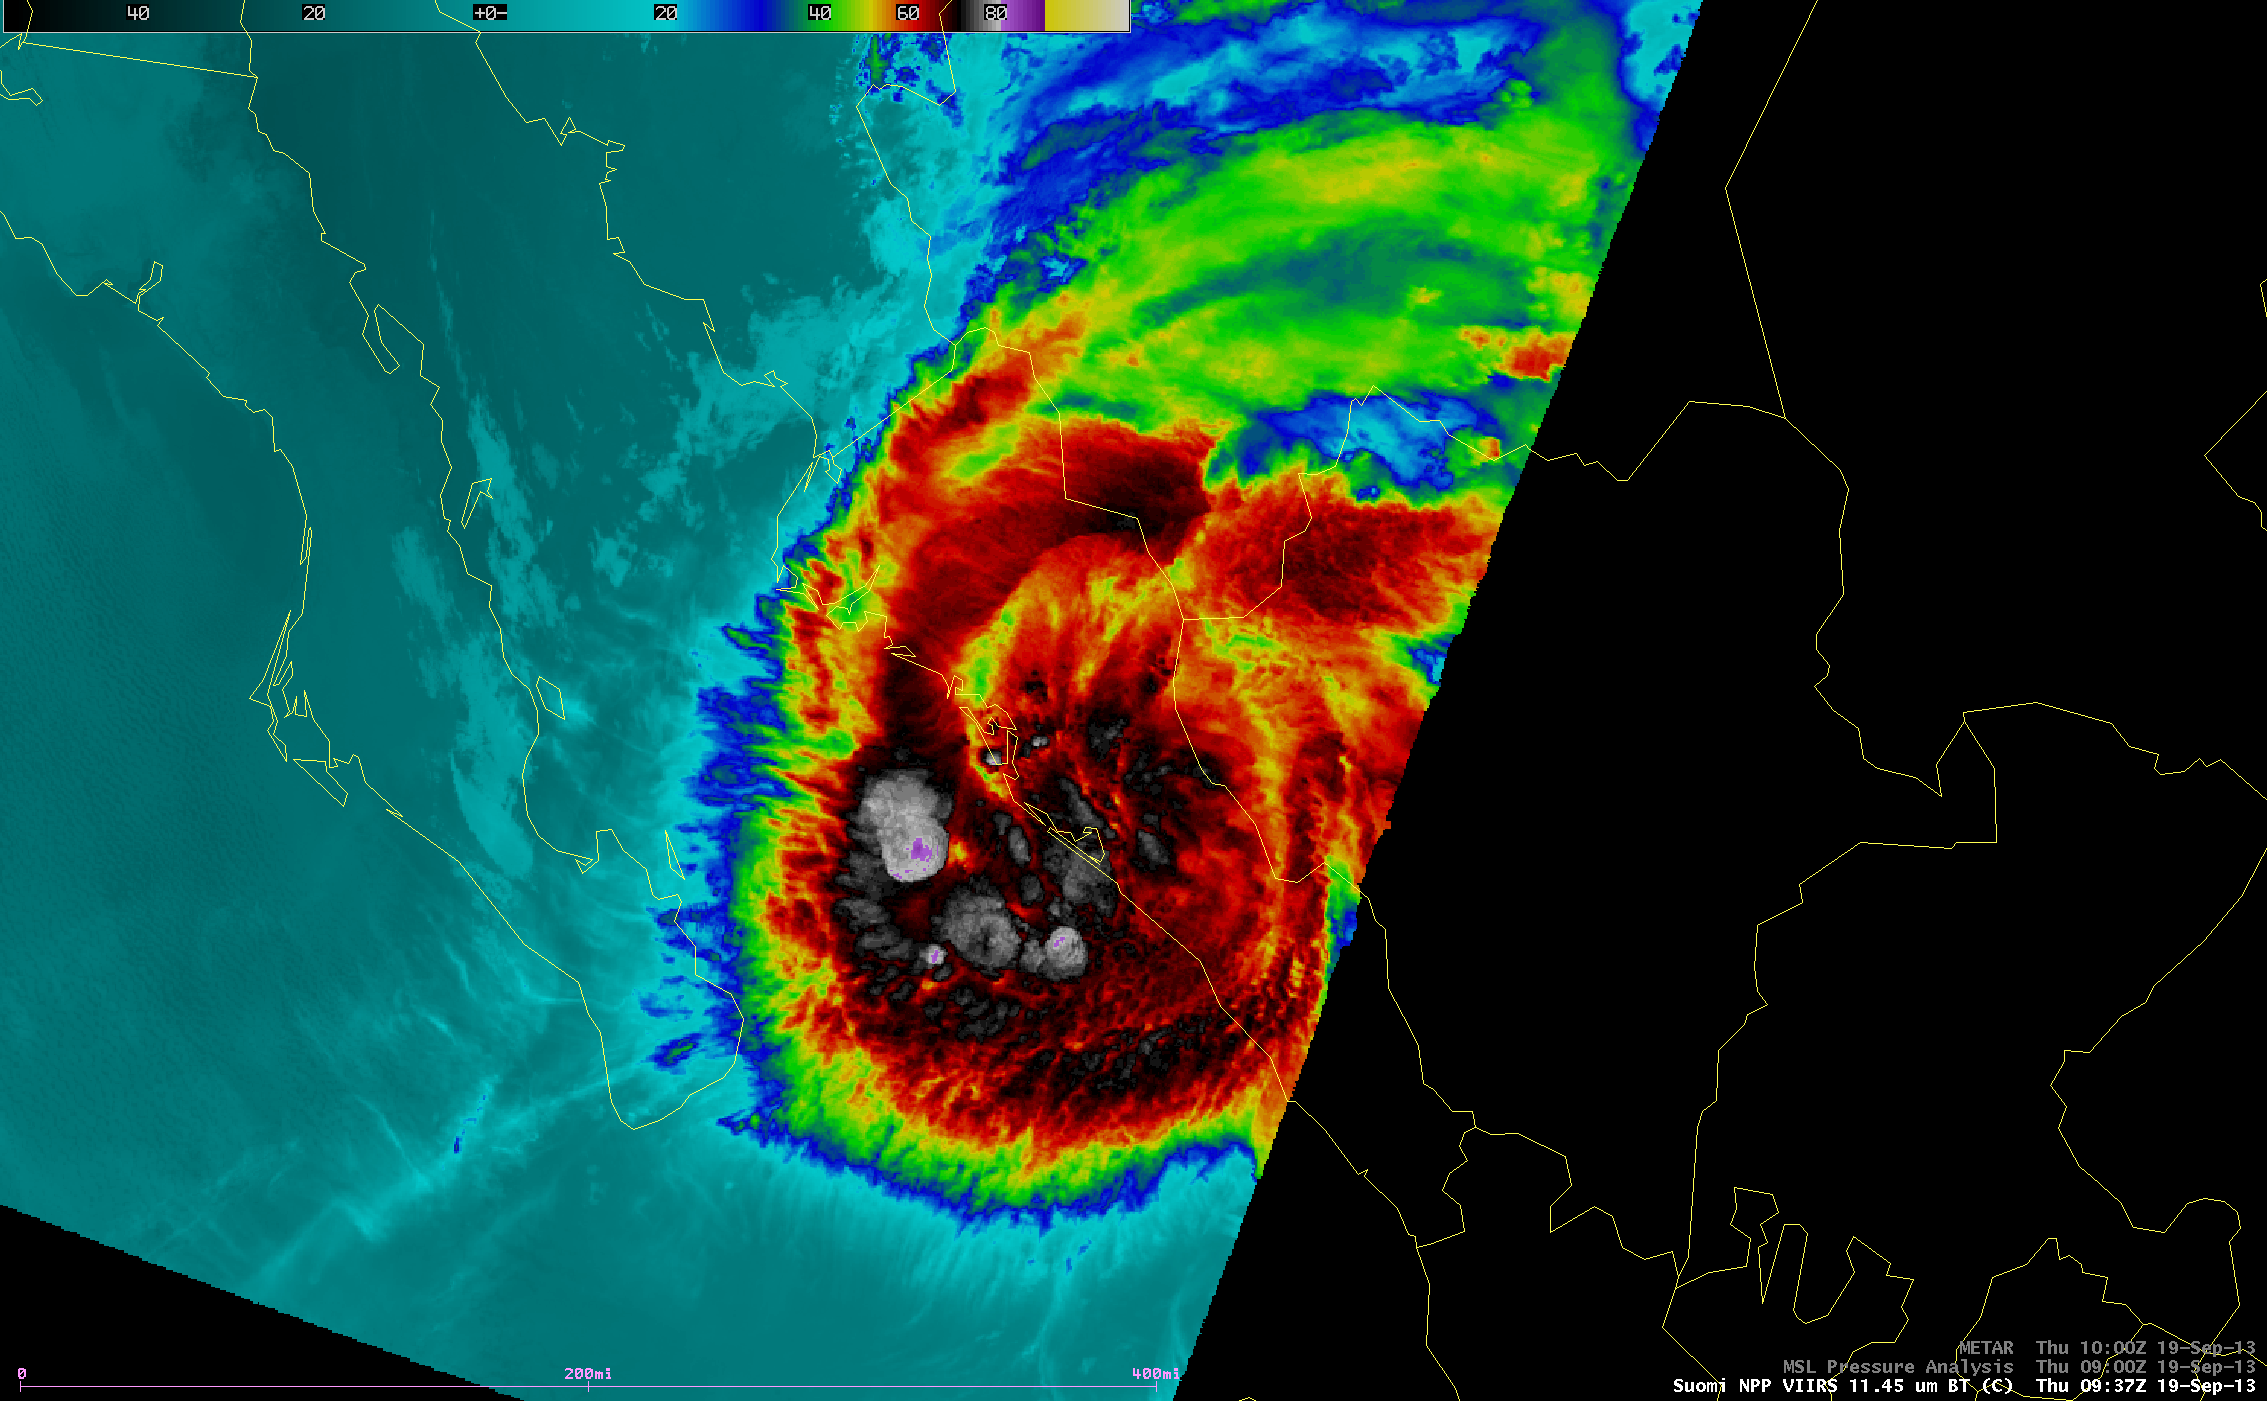 Suomi NPP VIIRS 11.45 Âµm IR channel and 0.7 Âµm Day/Night Band images